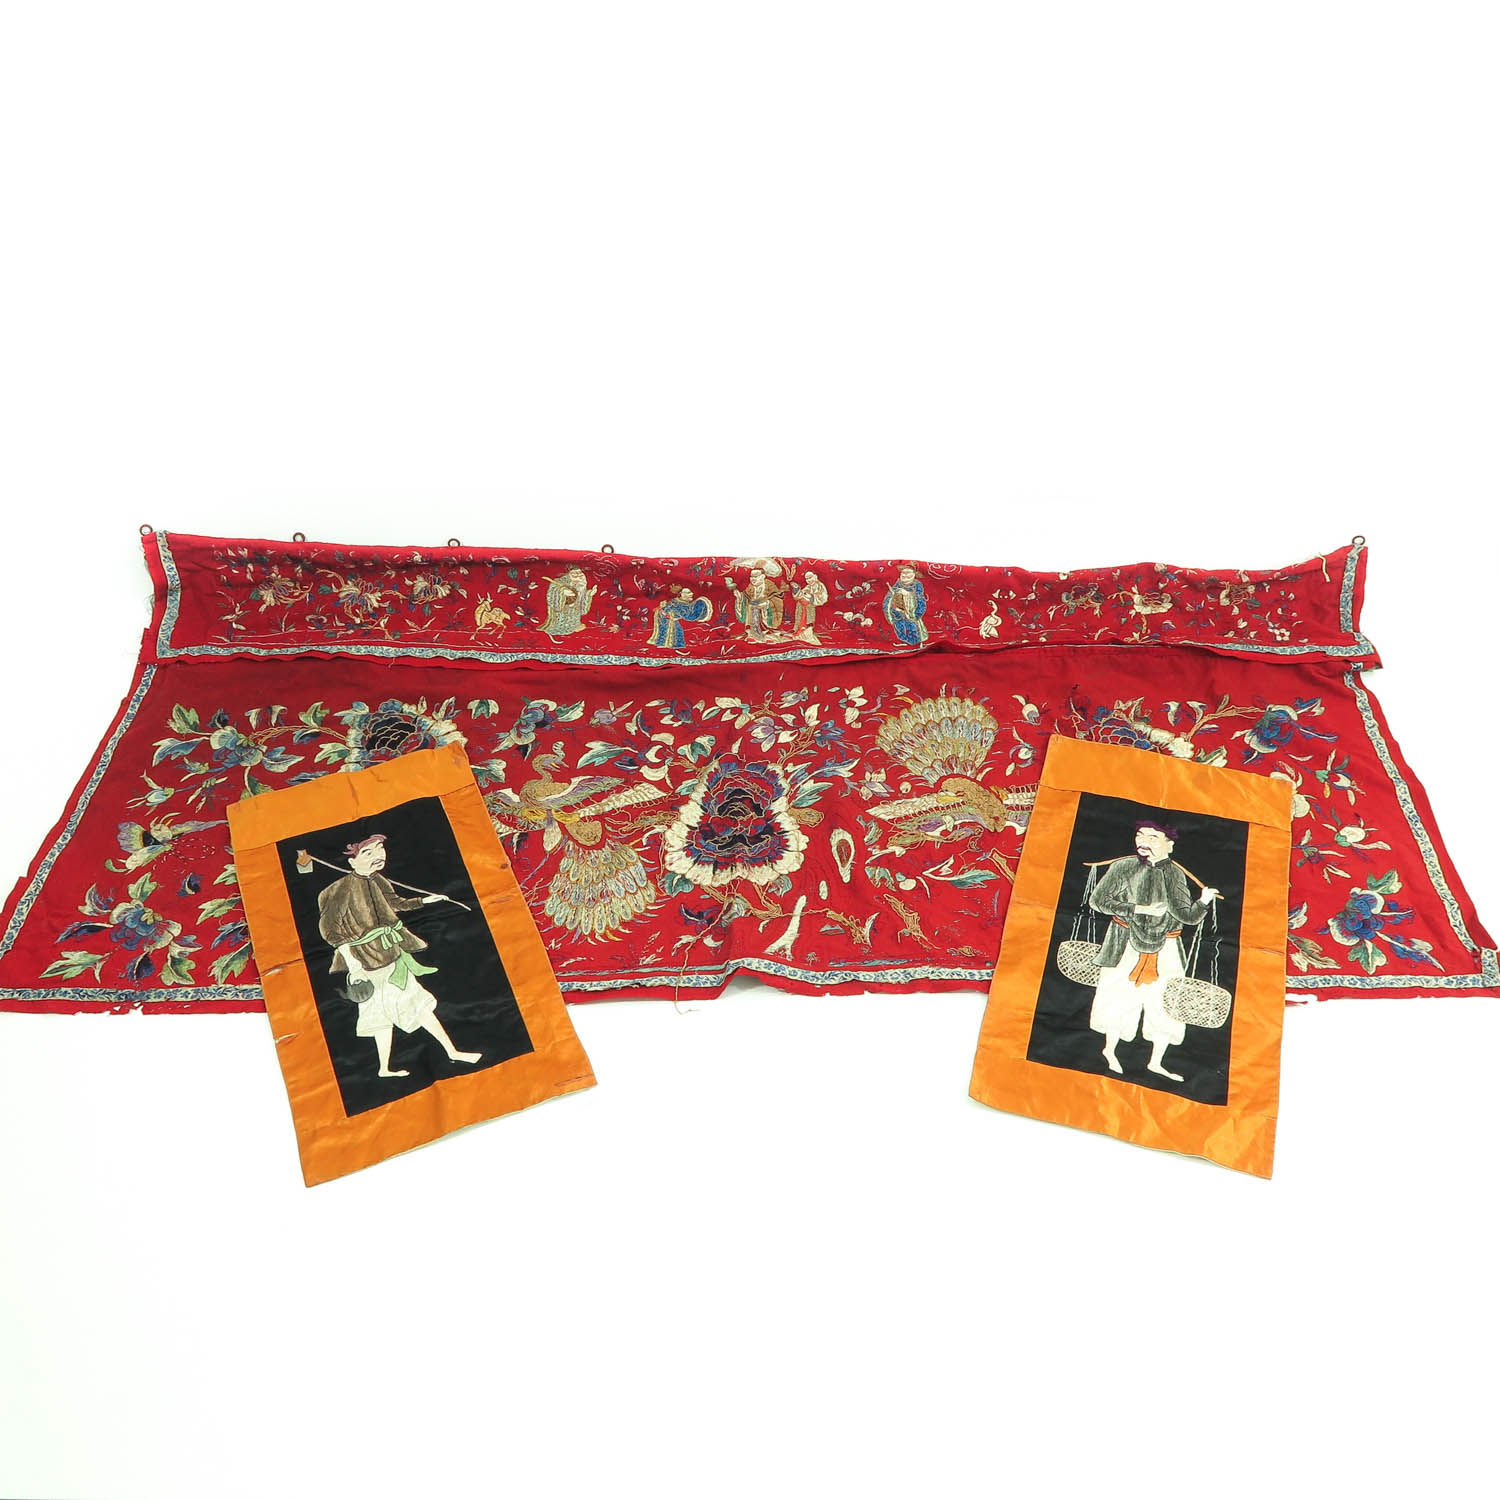 A Collection of Chinese Textiles